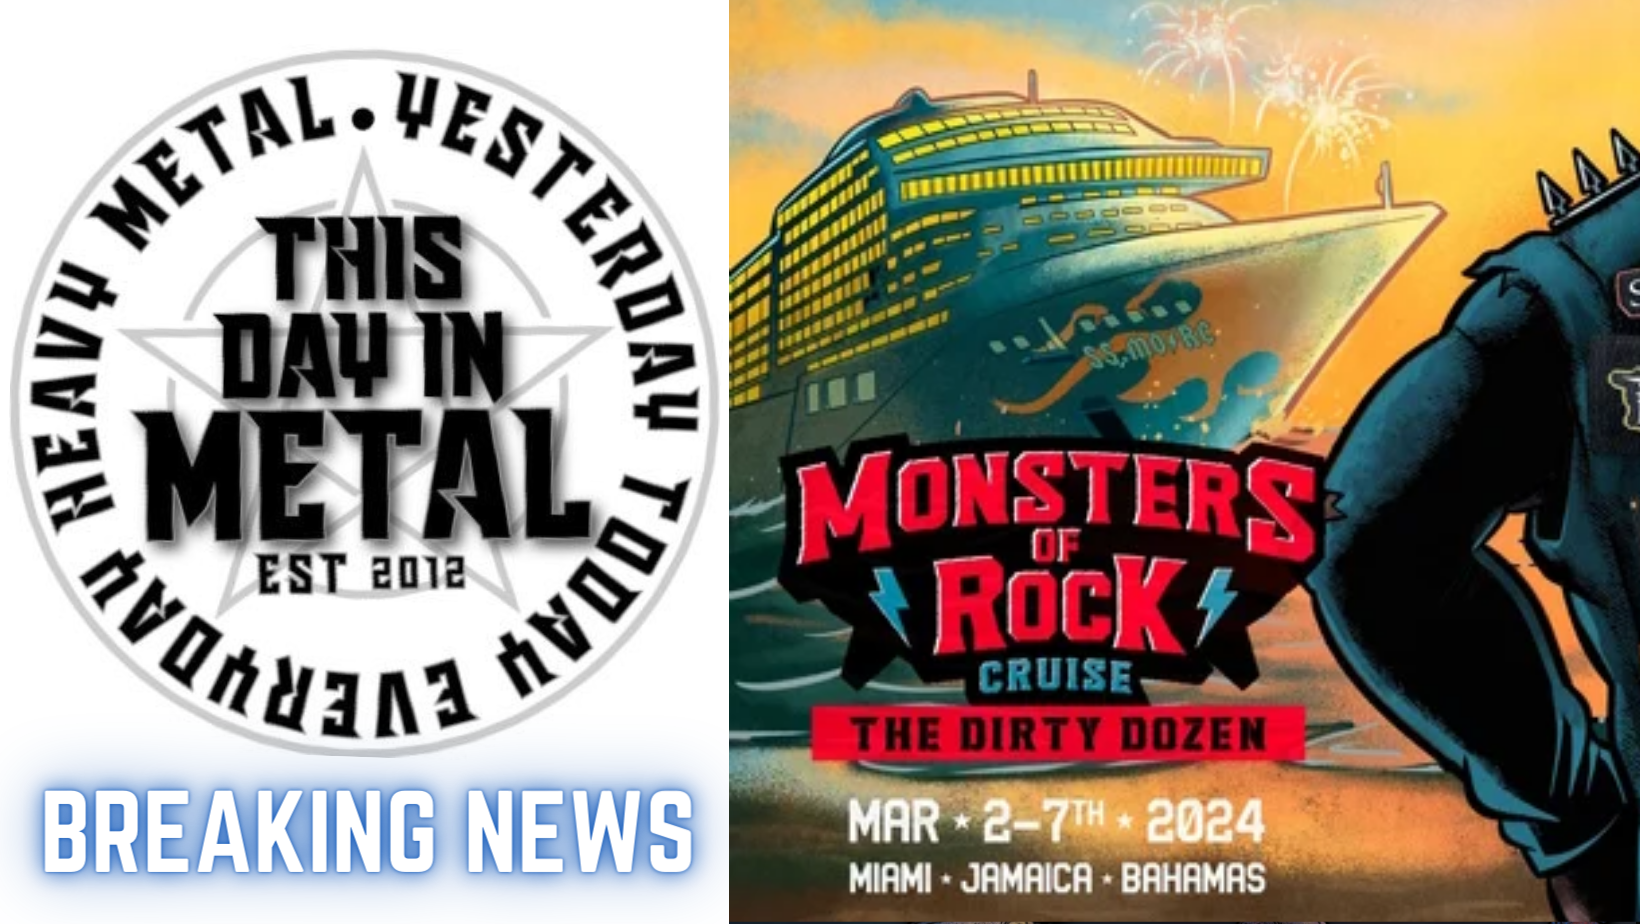 Monsters Of Rock Cruise announces bands for 2024